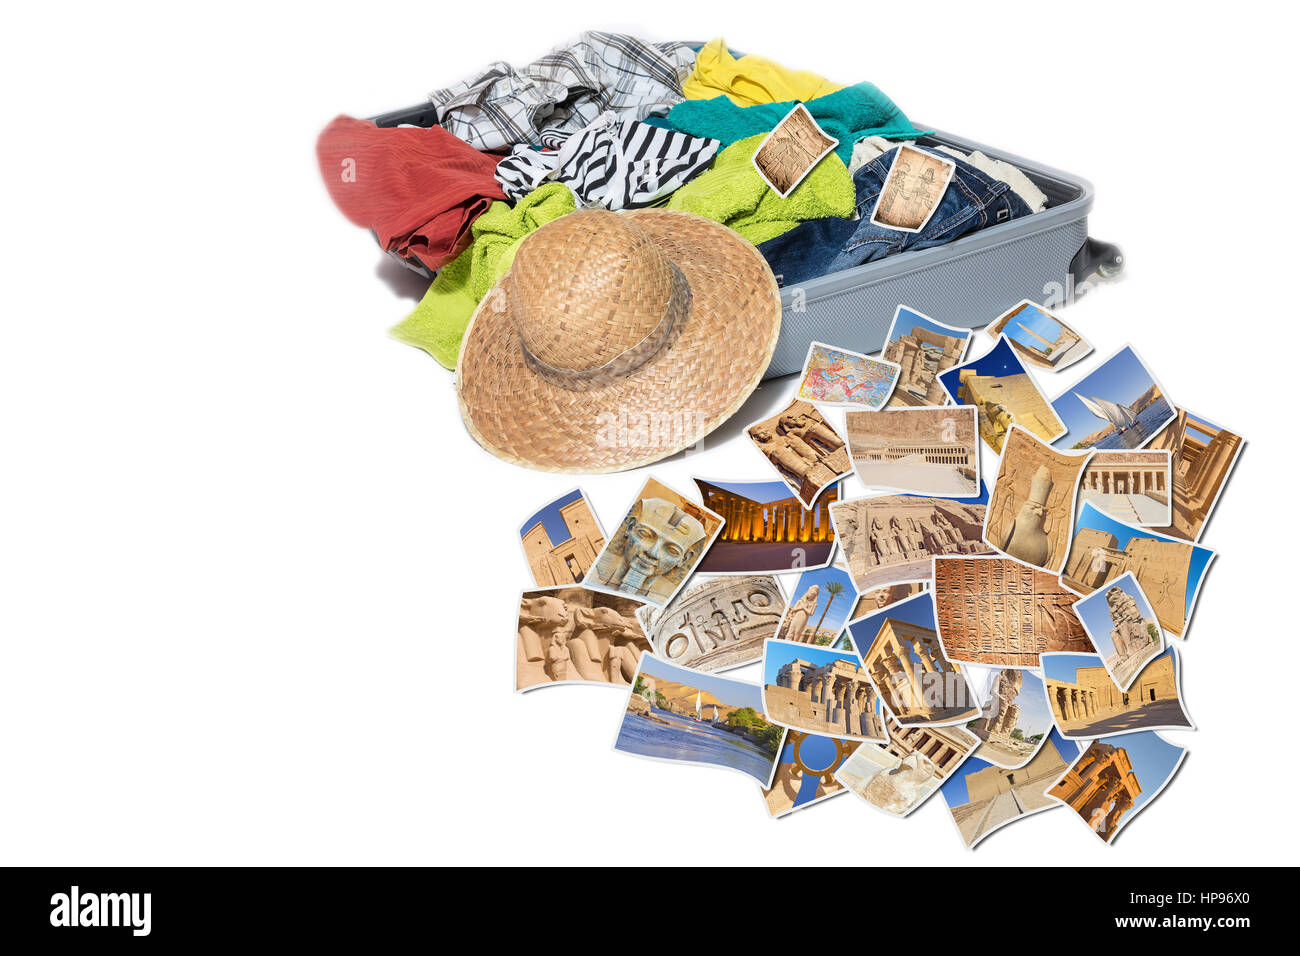 Studio shot of a suitcase with scattered clothing and straw hat. Photos of Egypt landmarks are lying in front of the suitcase. Everything is on a whit Stock Photo